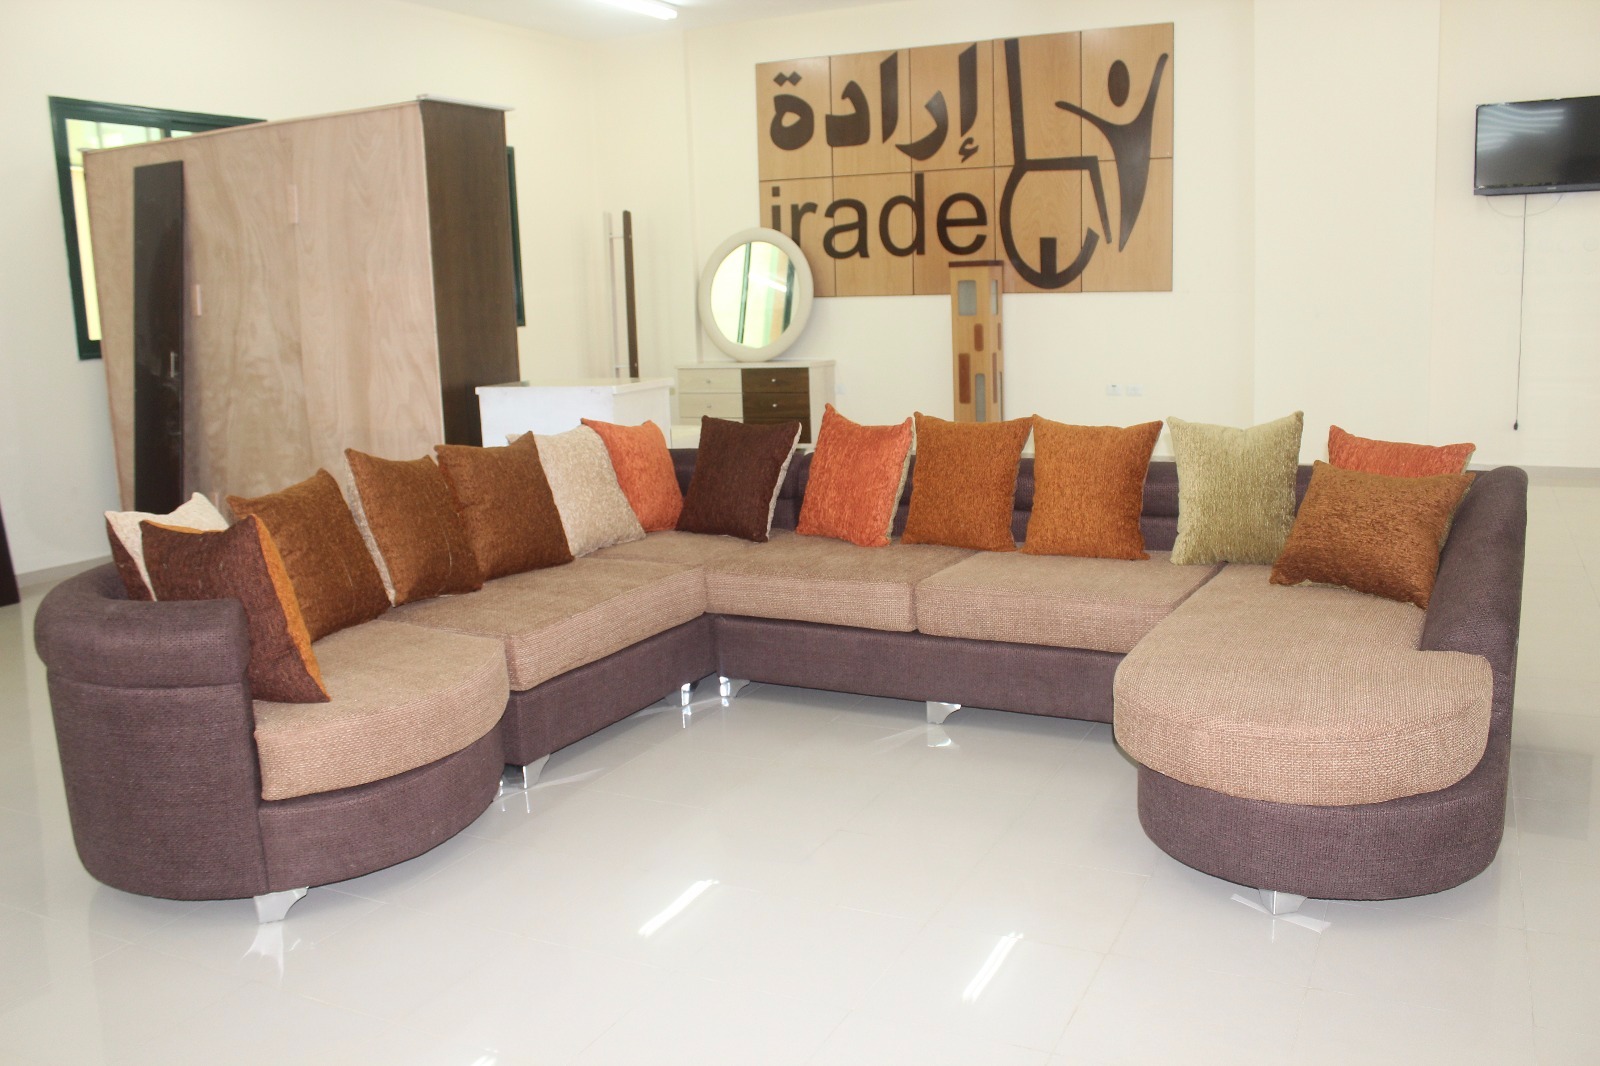 Furniture made by Irada students